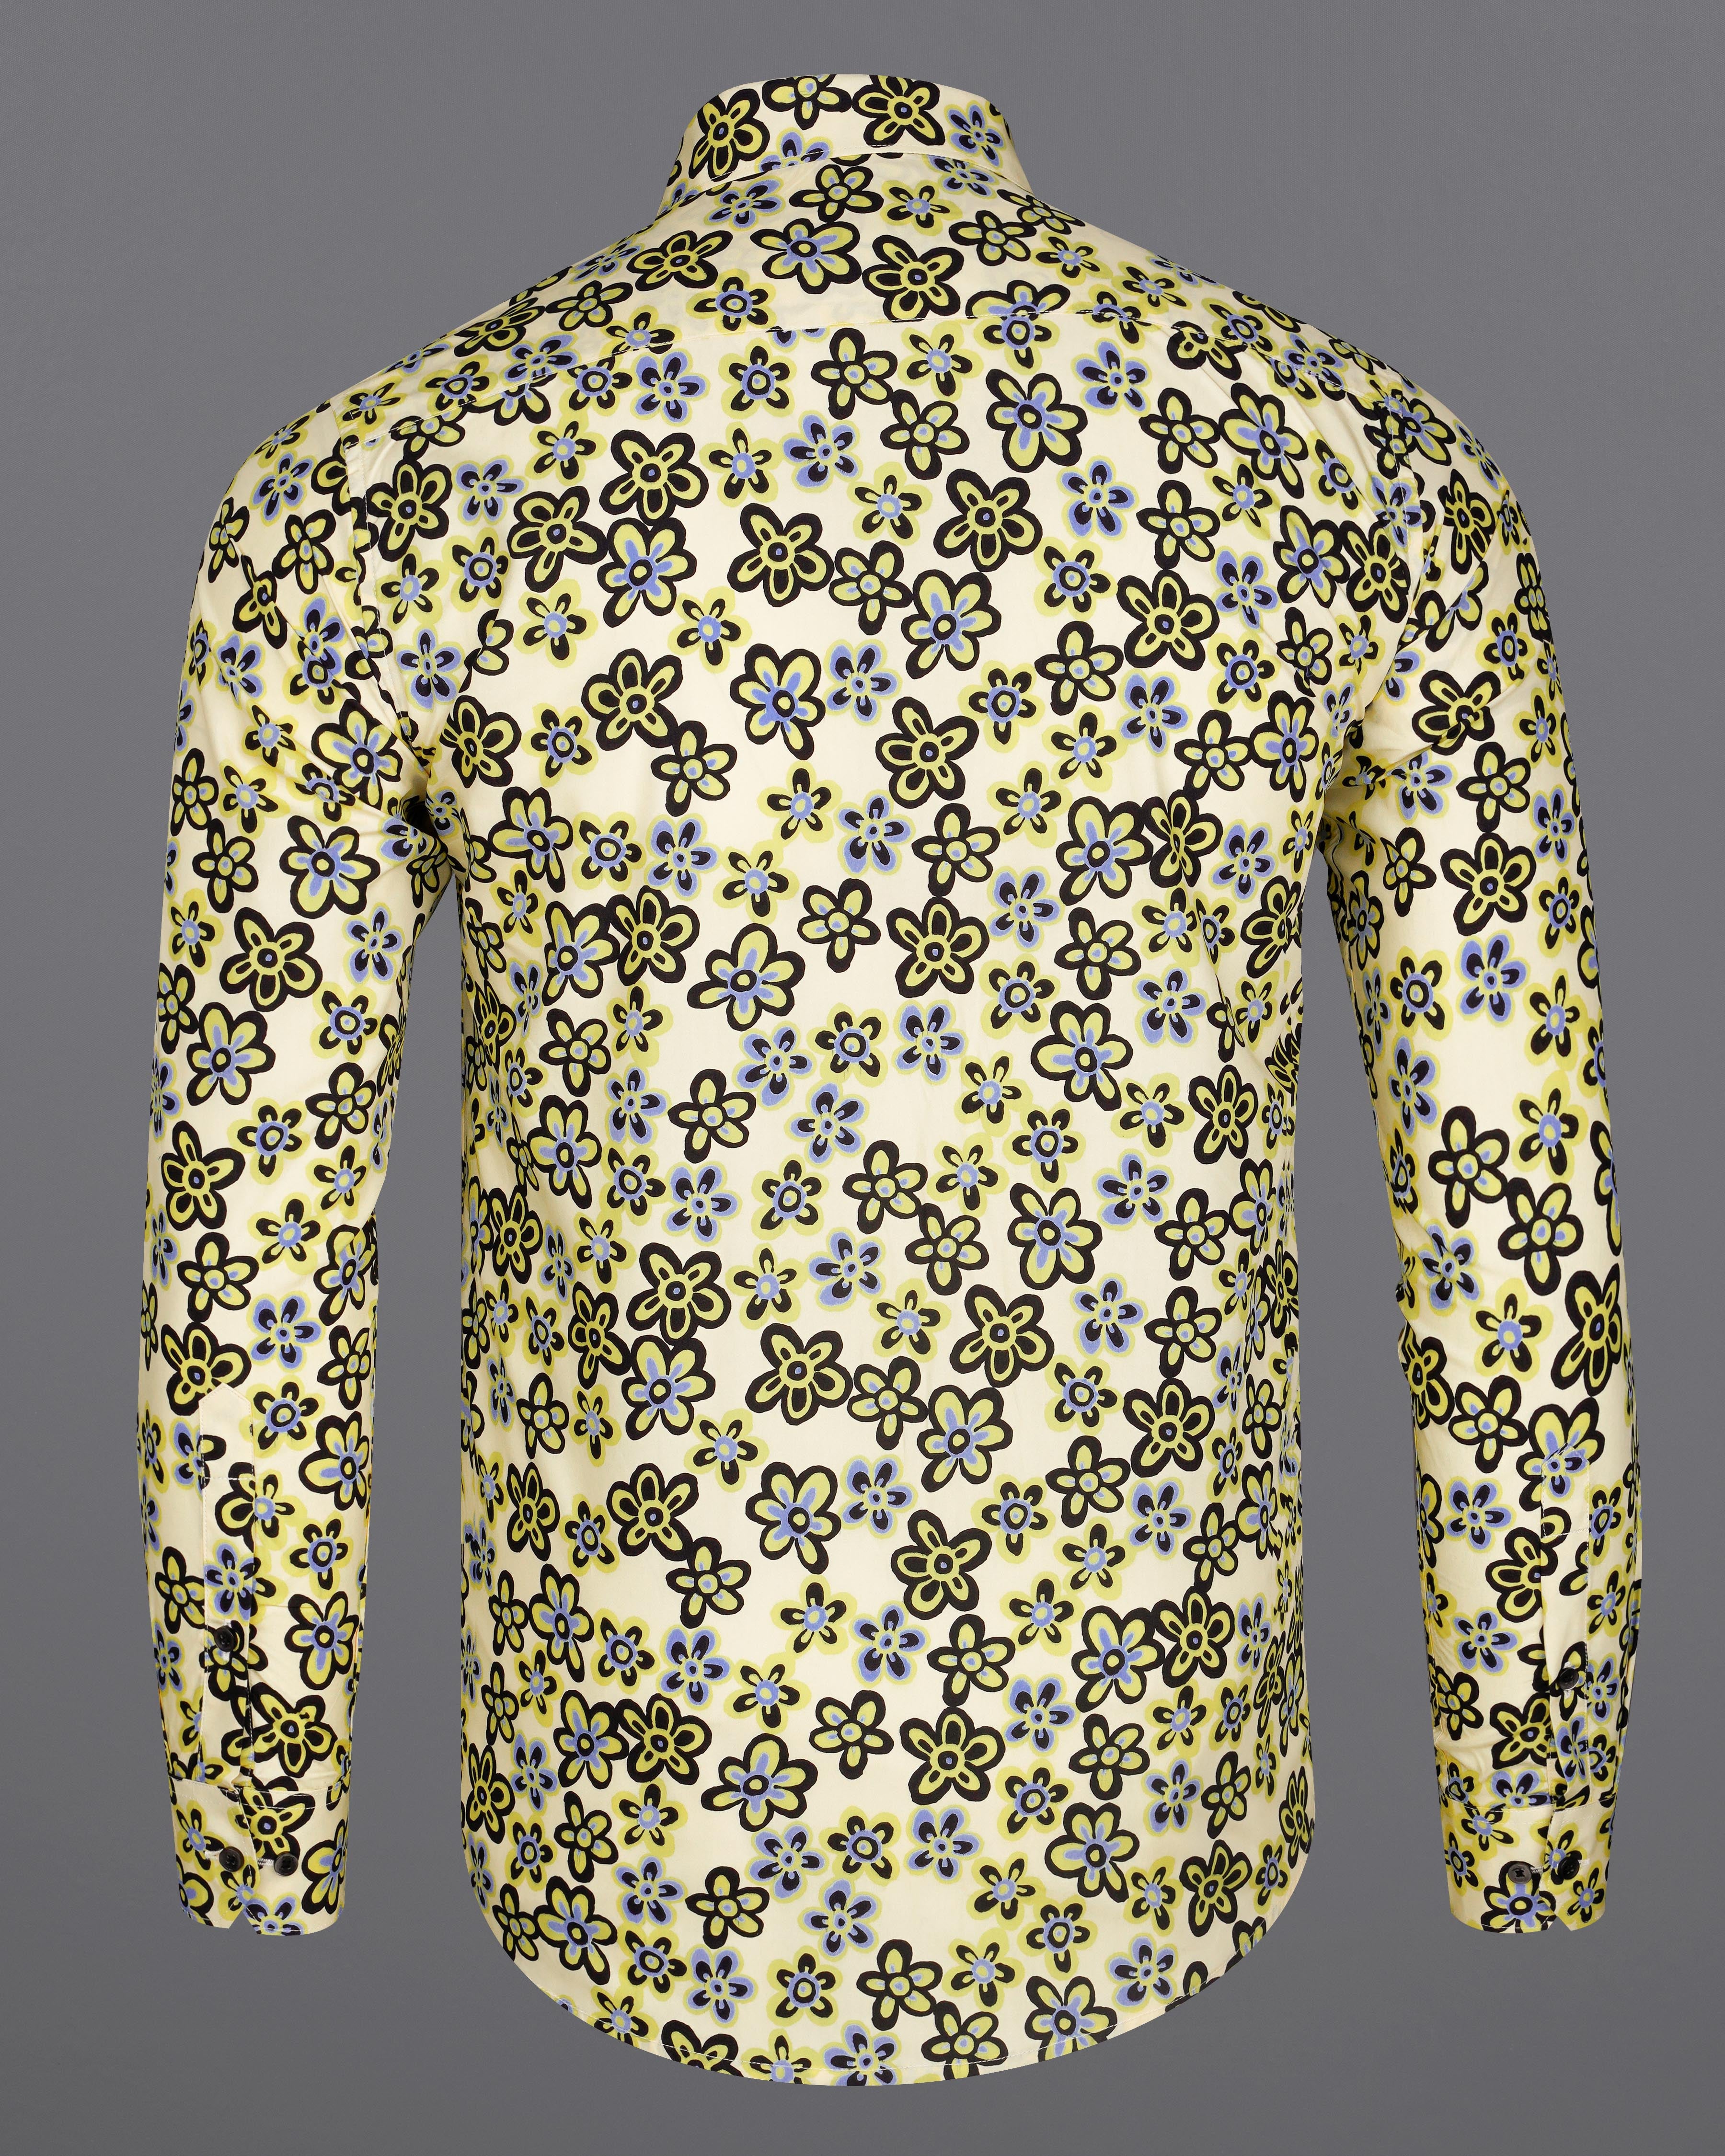 Solitaire with Straw Yellow and Jade Black Ditsy Printed Premium Cotton Shirt 8358-BLK-38, 8358-BLK-H-38, 8358-BLK-39, 8358-BLK-H-39, 8358-BLK-40, 8358-BLK-H-40, 8358-BLK-42, 8358-BLK-H-42, 8358-BLK-44, 8358-BLK-H-44, 8358-BLK-46, 8358-BLK-H-46, 8358-BLK-48, 8358-BLK-H-48, 8358-BLK-50, 8358-BLK-H-50, 8358-BLK-52, 8358-BLK-H-52